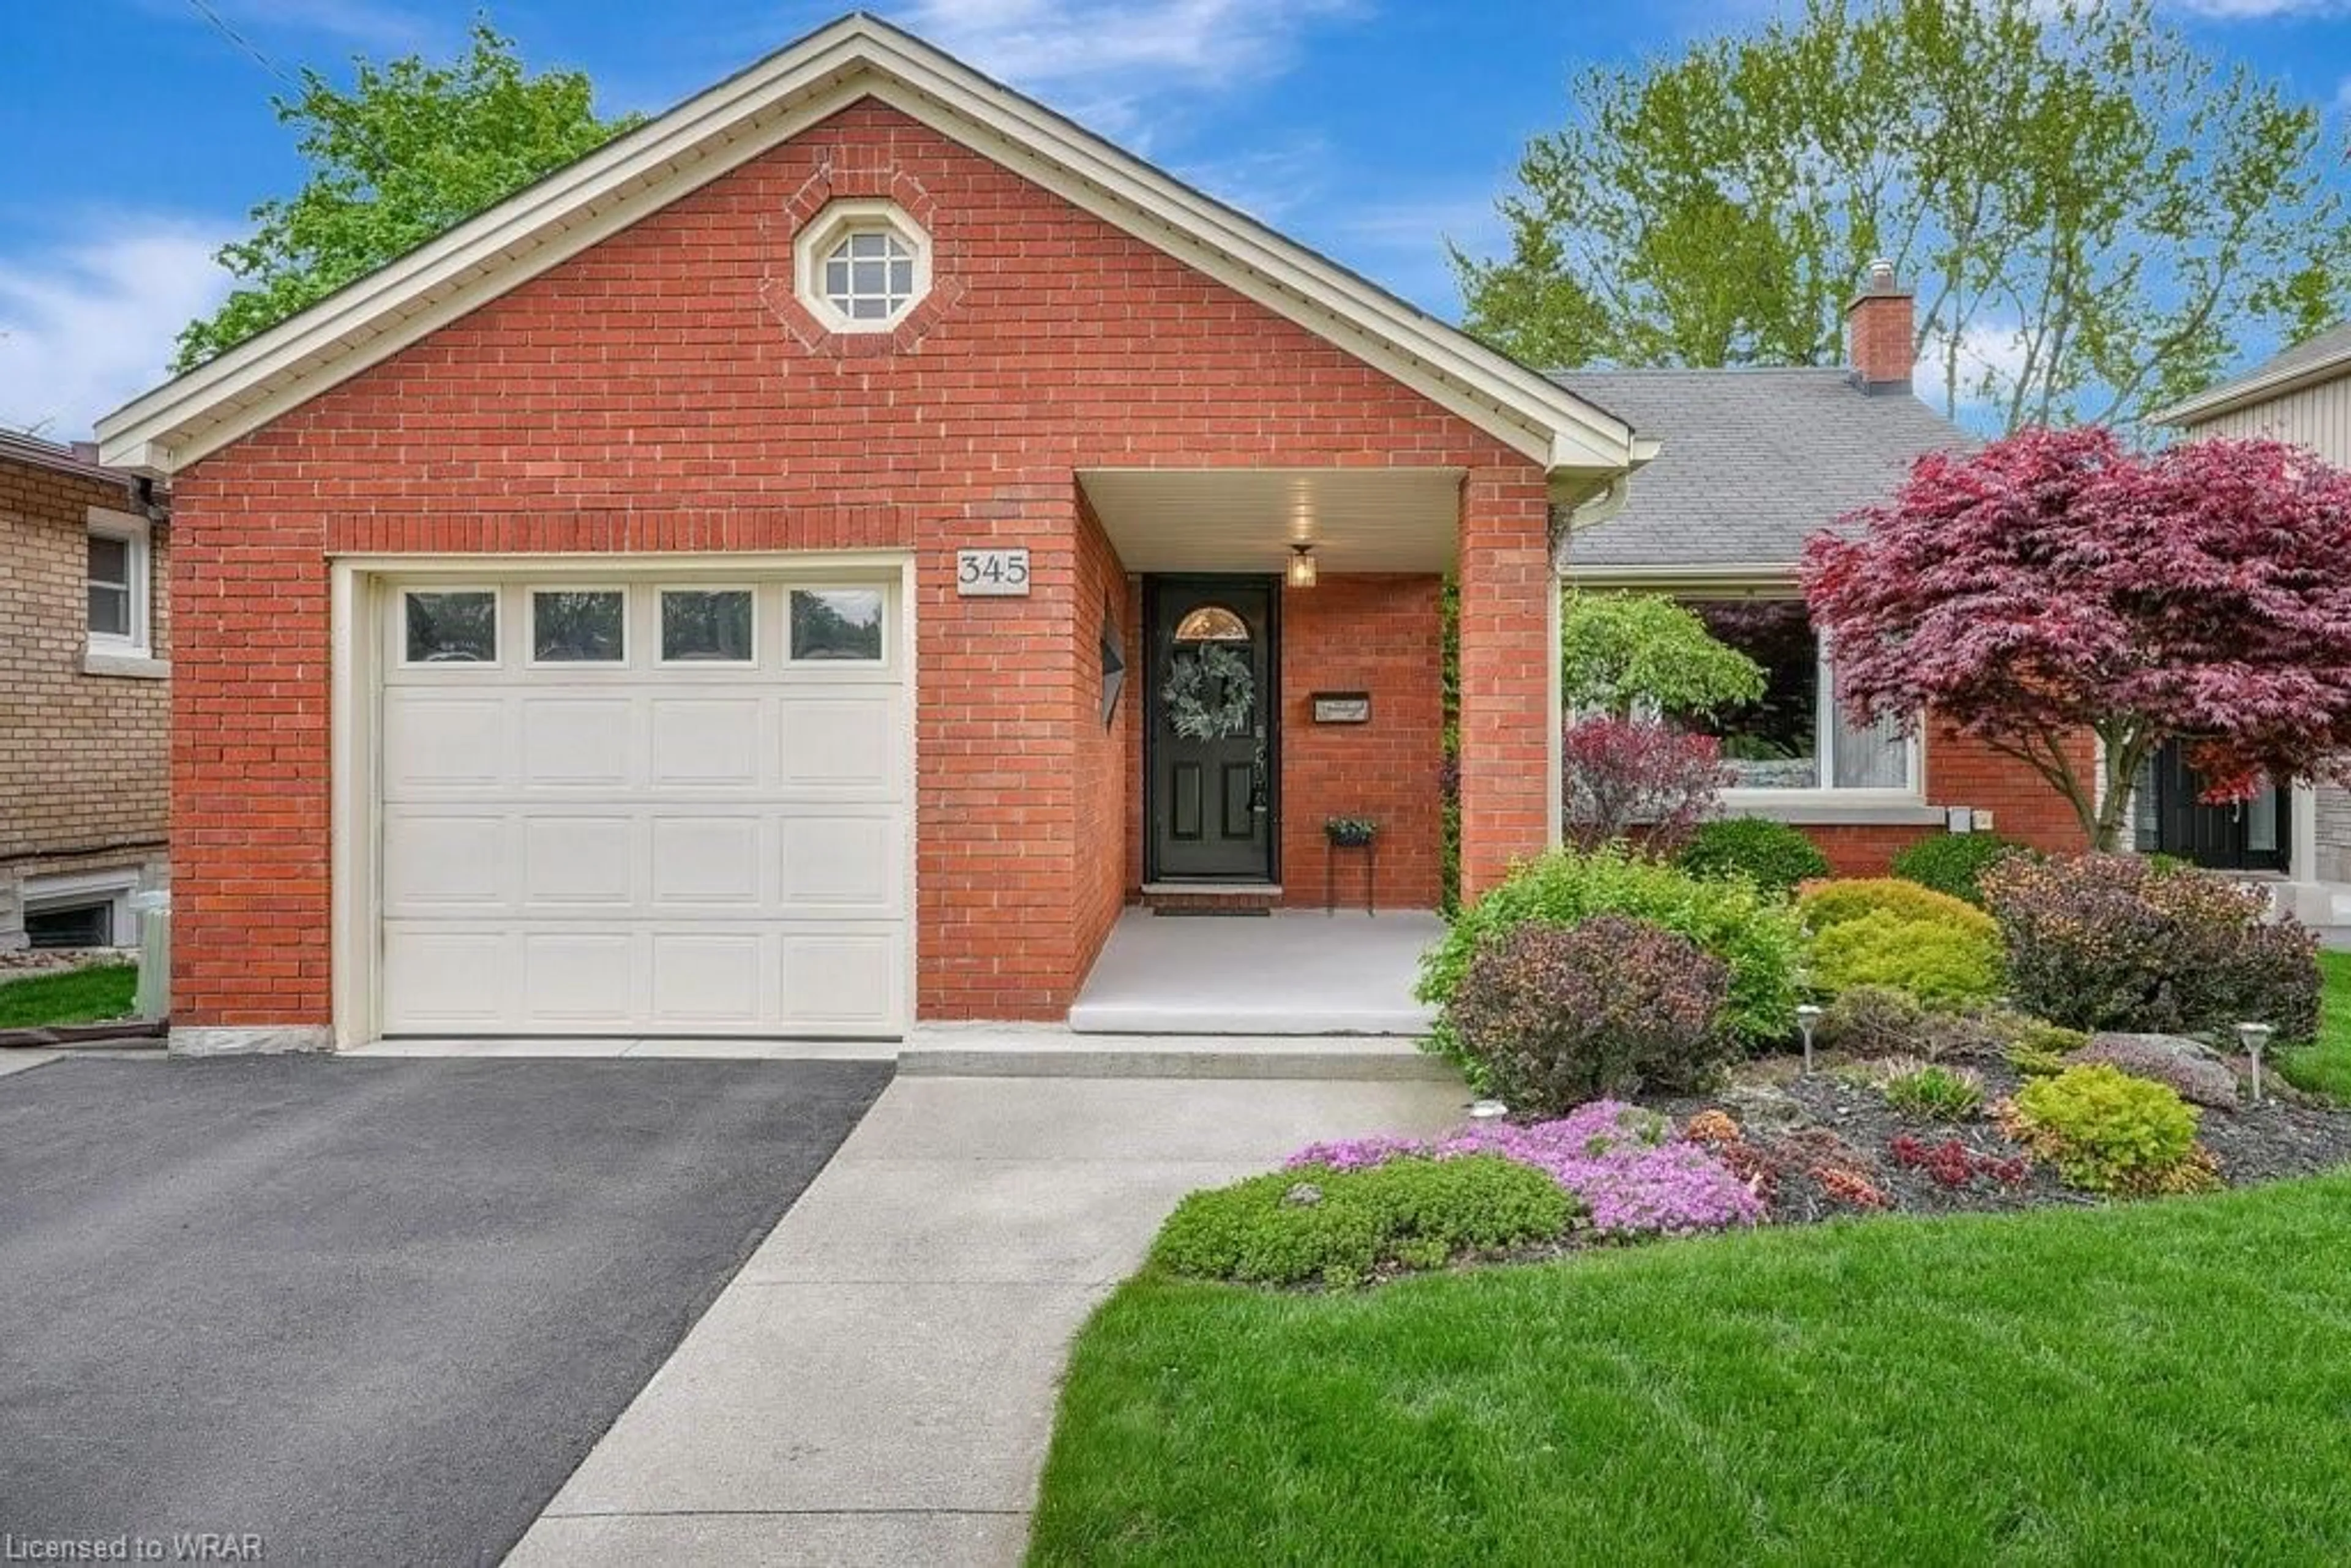 Home with brick exterior material for 345 Highland Pk, Cambridge Ontario N3H 3H8